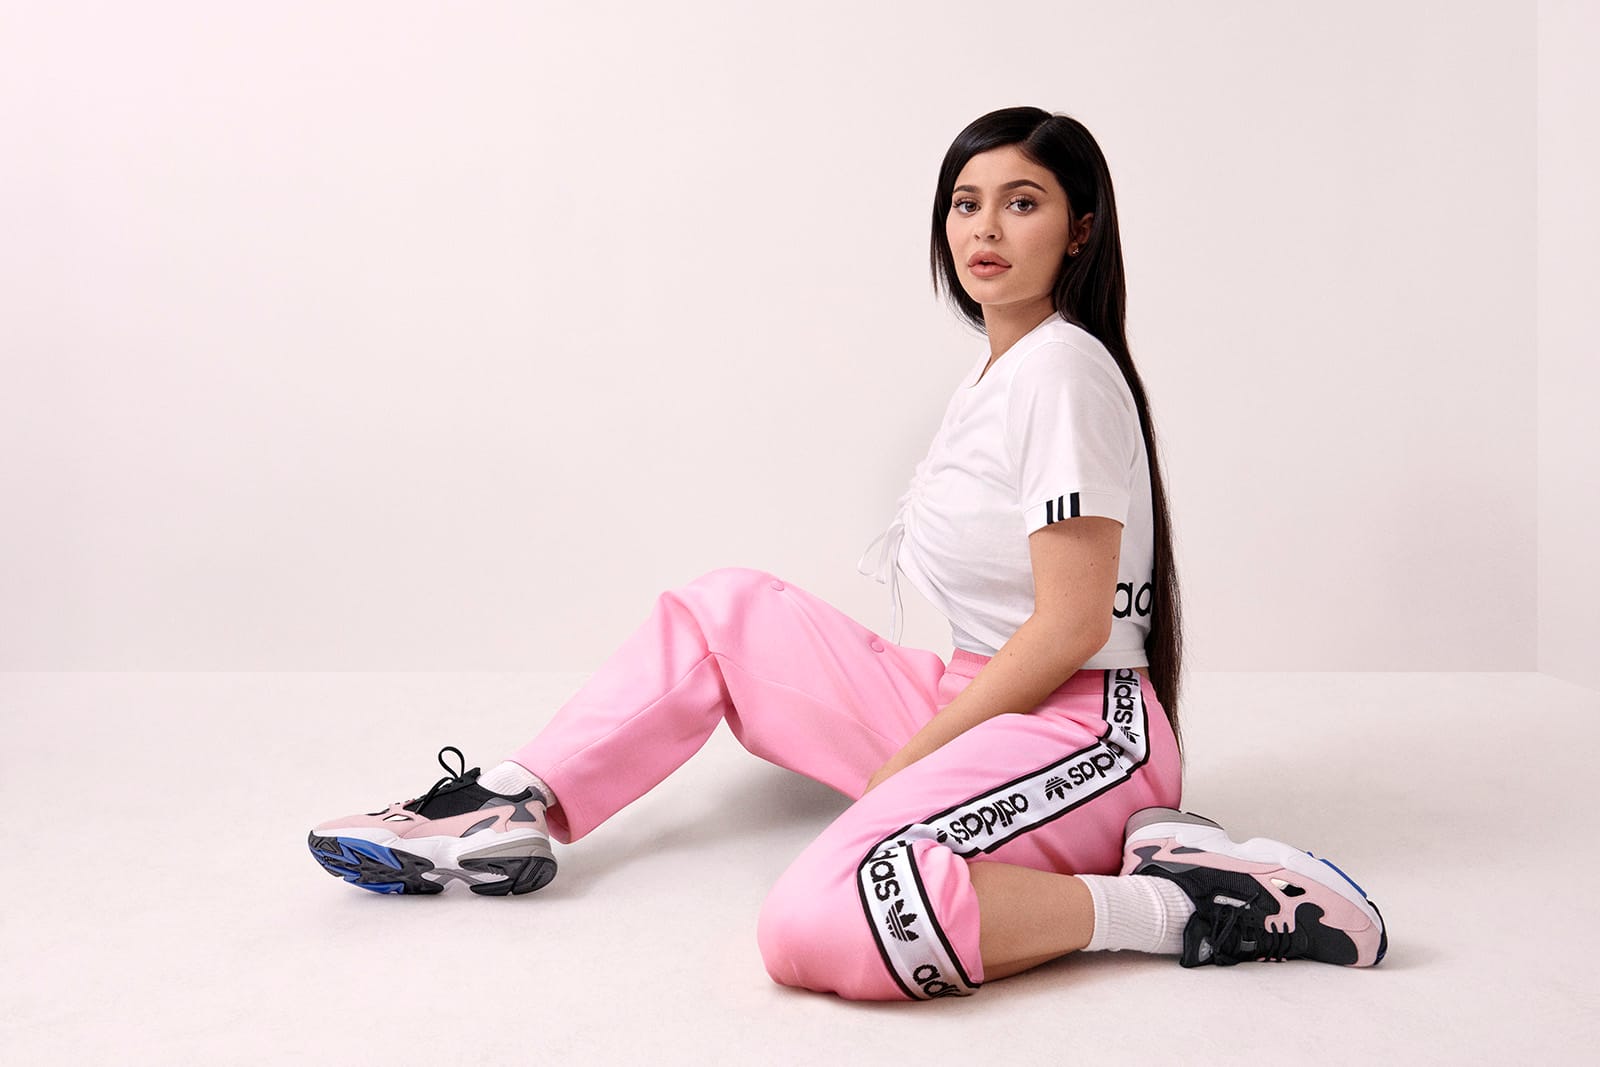 adidas collection kylie jenner